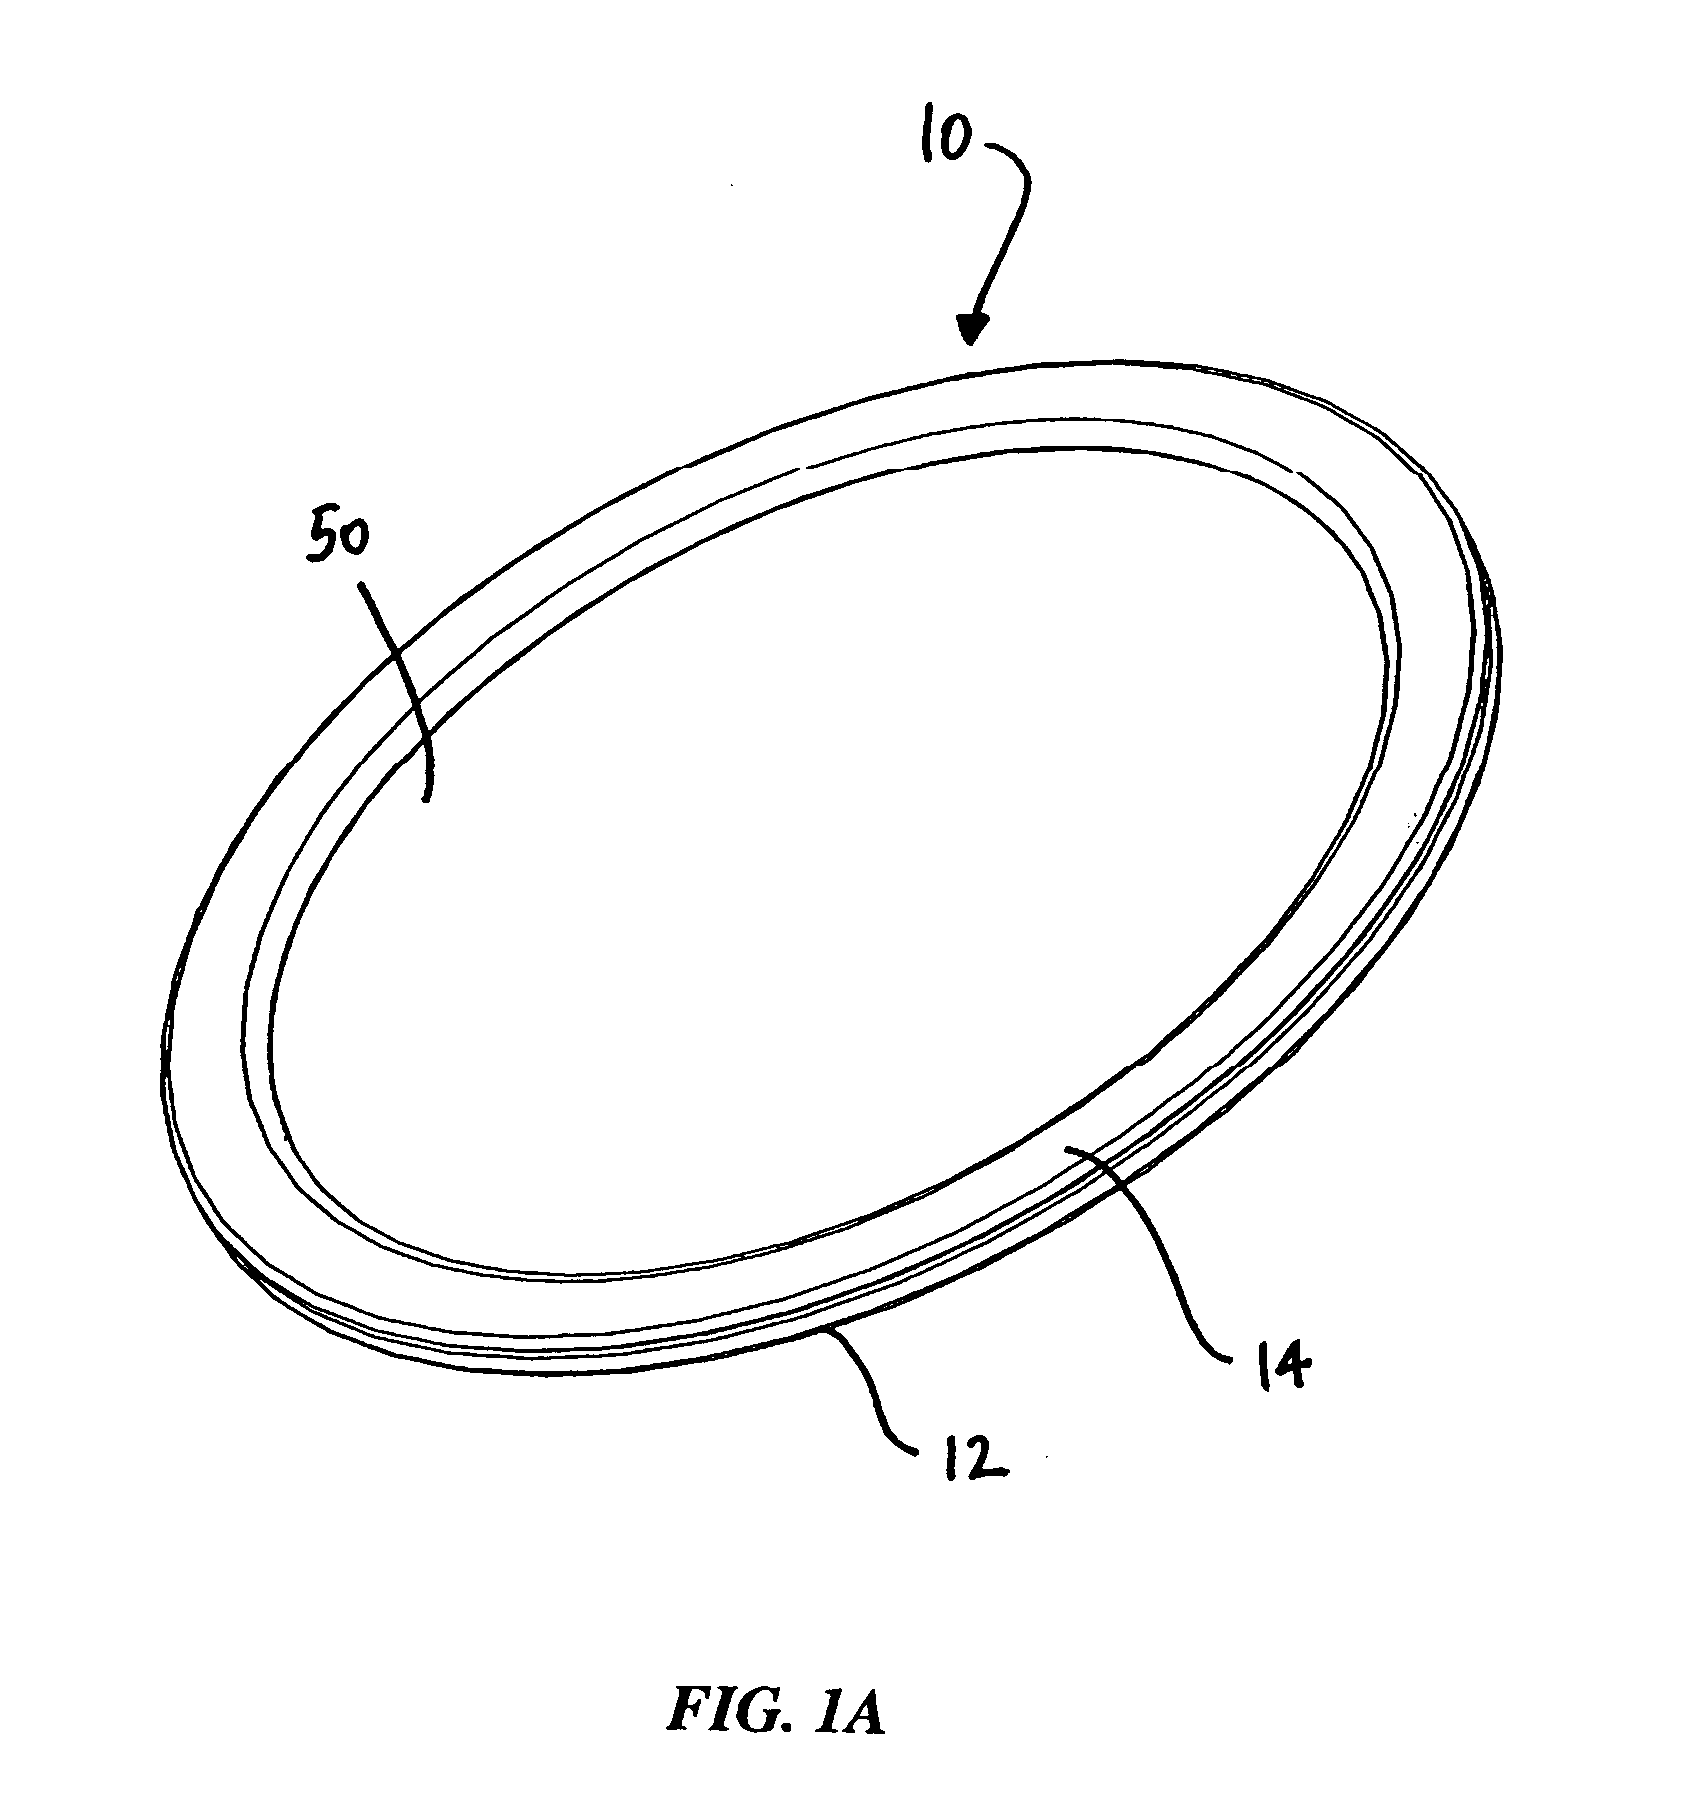 Process for thinning a semiconductor workpiece